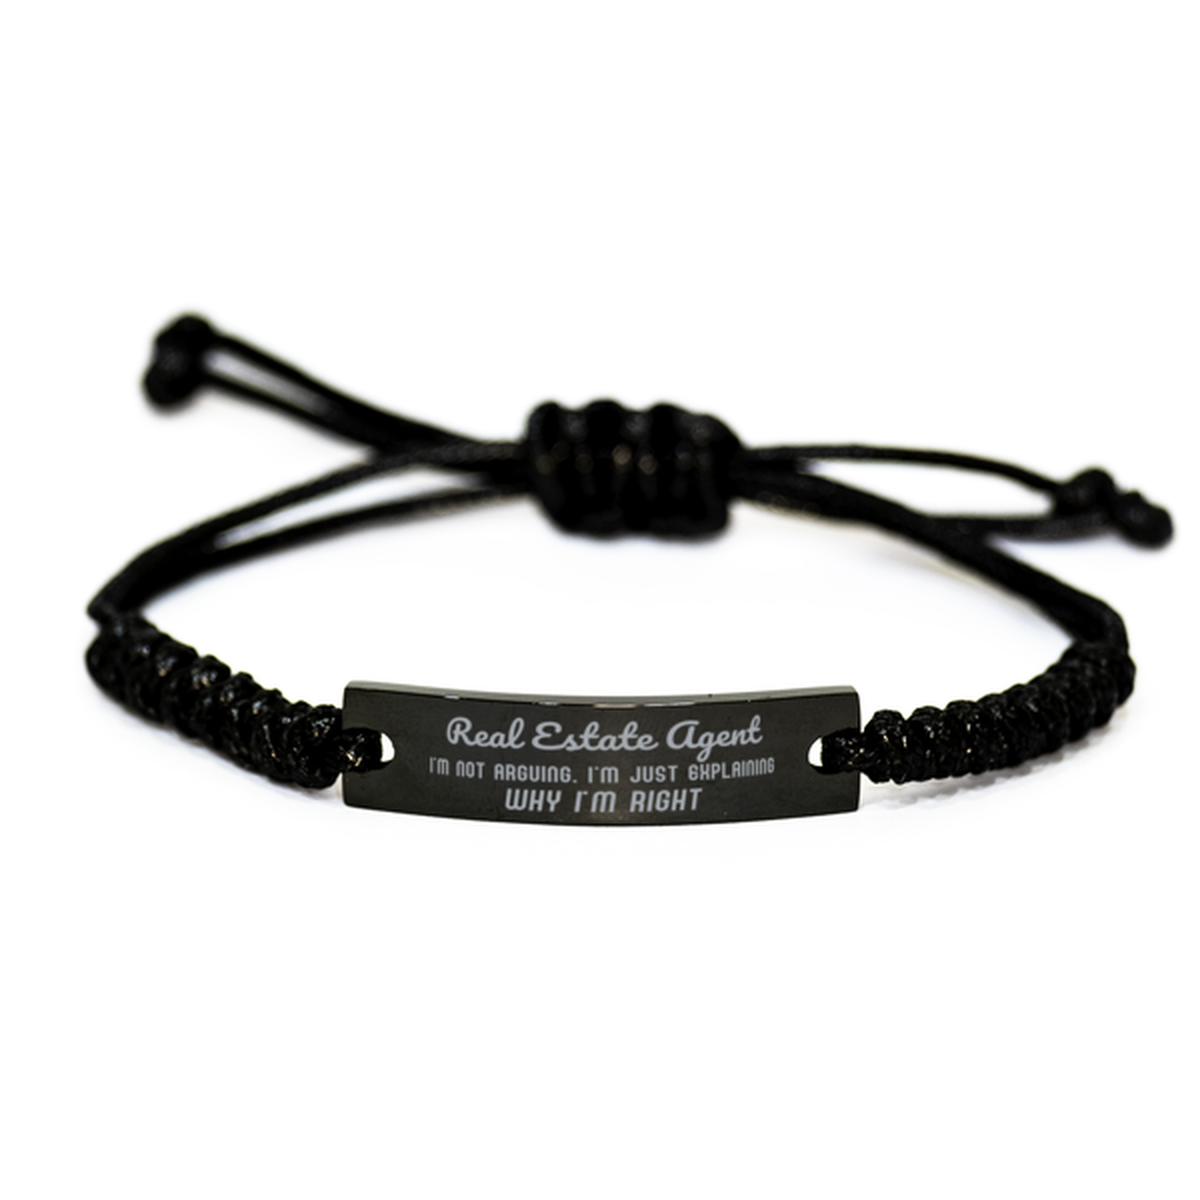 Real Estate Agent I'm not Arguing. I'm Just Explaining Why I'm RIGHT Black Rope Bracelet, Funny Saying Quote Real Estate Agent Gifts For Real Estate Agent Graduation Birthday Christmas Gifts for Men Women Coworker